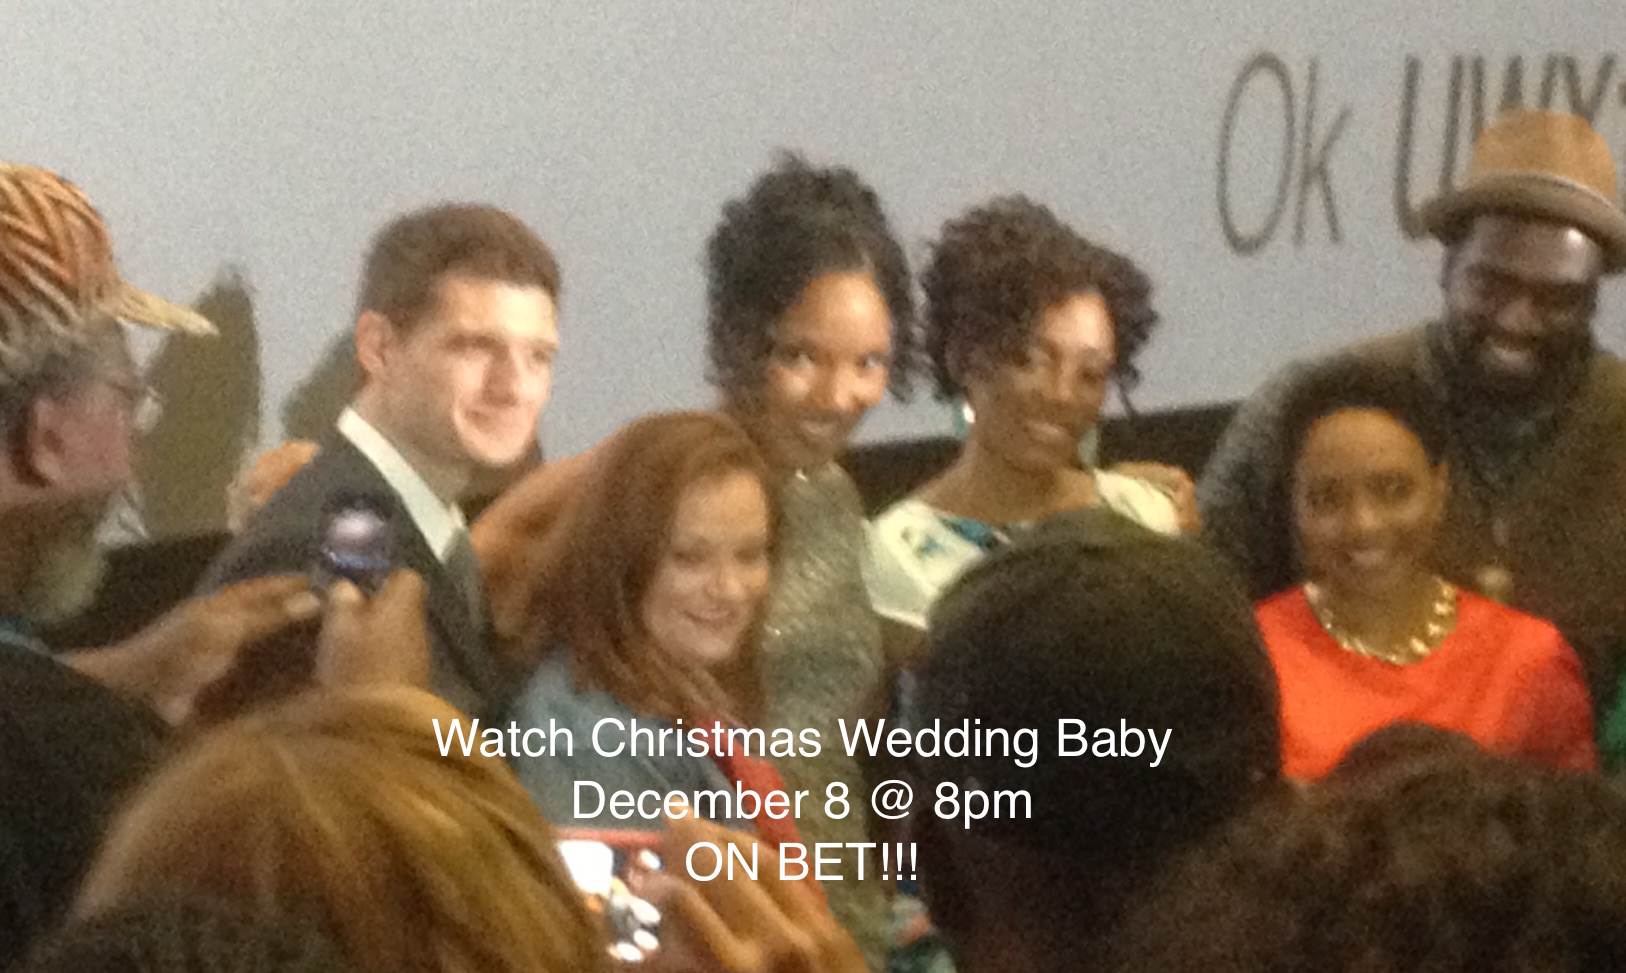 See Christmas Wedding Baby on December 8, 2014 at 8pm EST on BET!!!